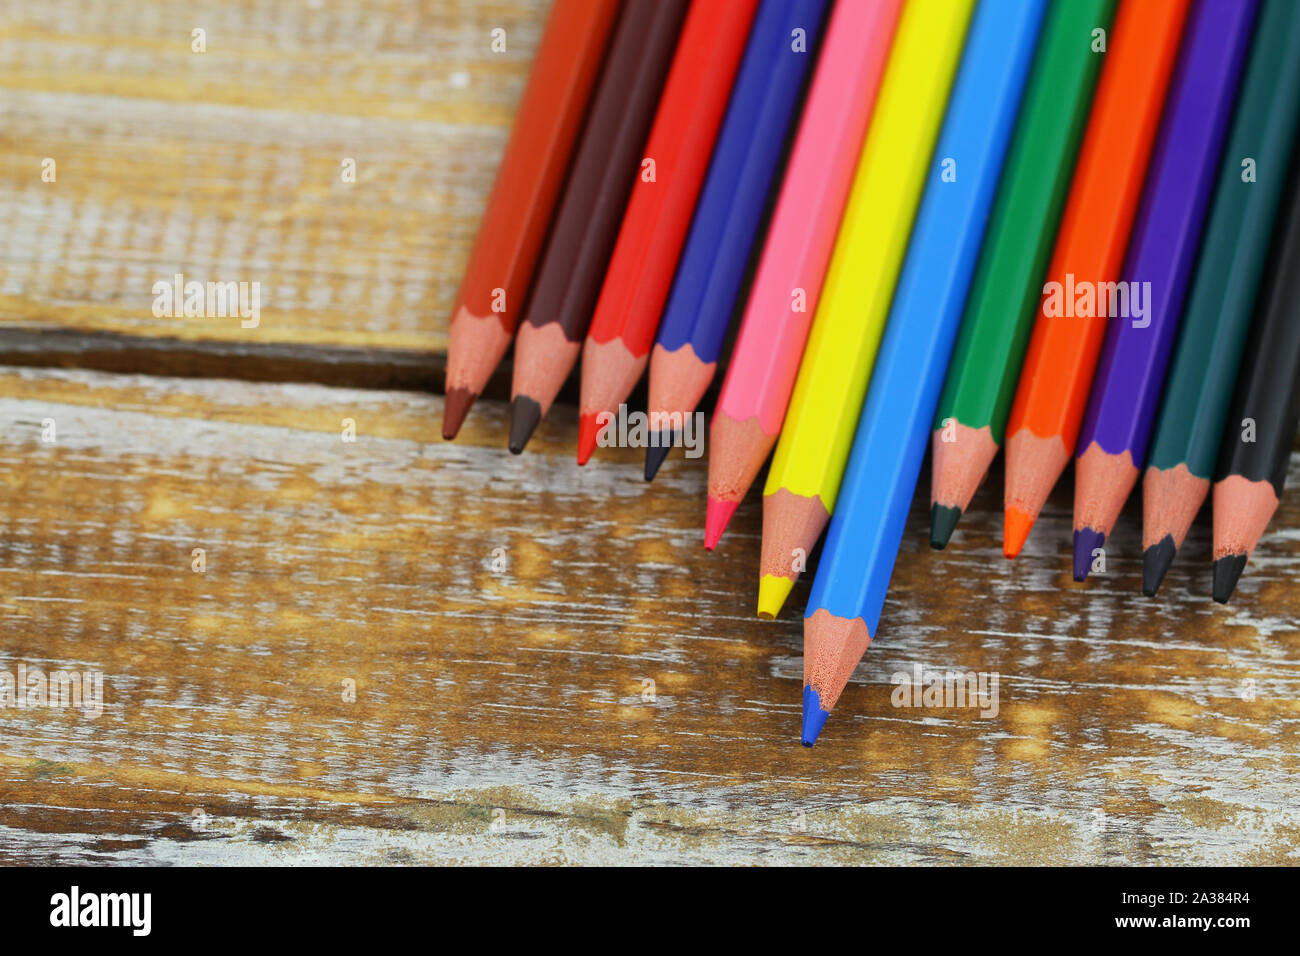 Colorful pencils spread out on wooden surface with copy space Stock Photo